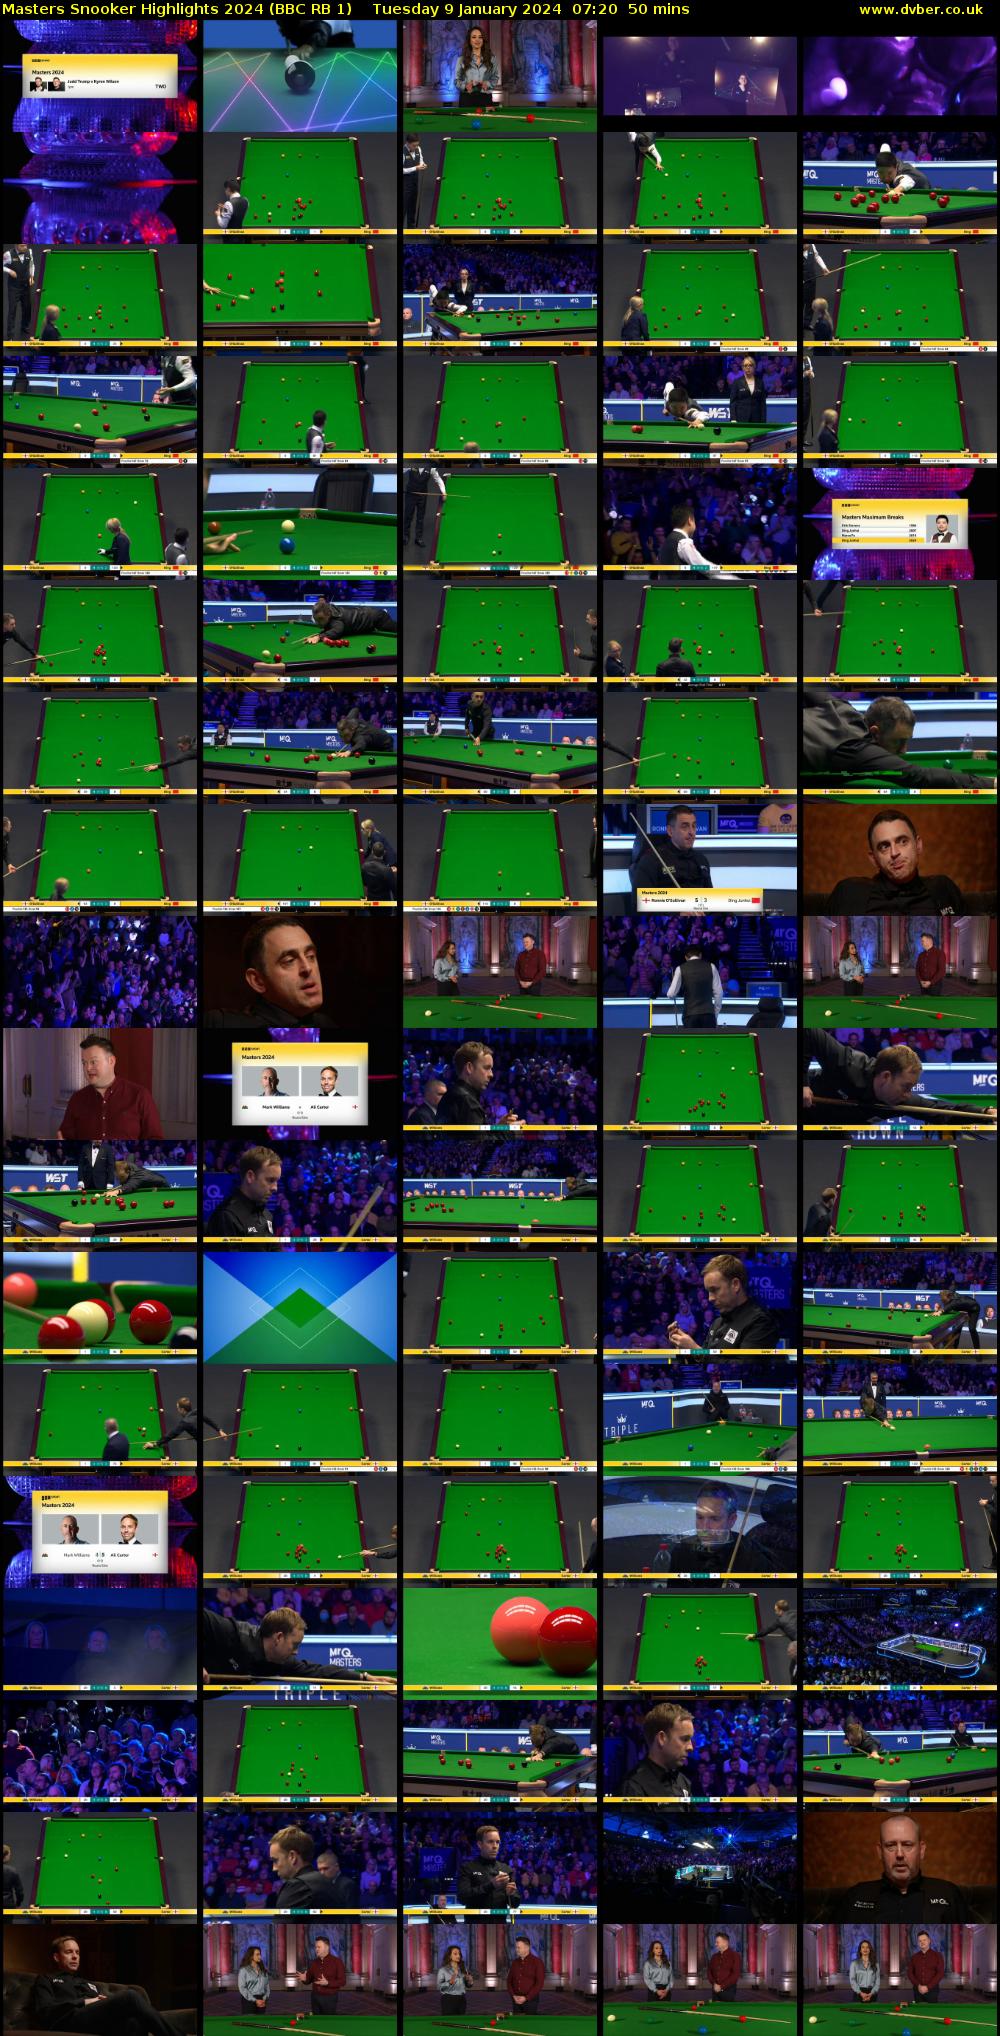 Masters Snooker Highlights 2024 (BBC RB 1) Tuesday 9 January 2024 07:20 - 08:10